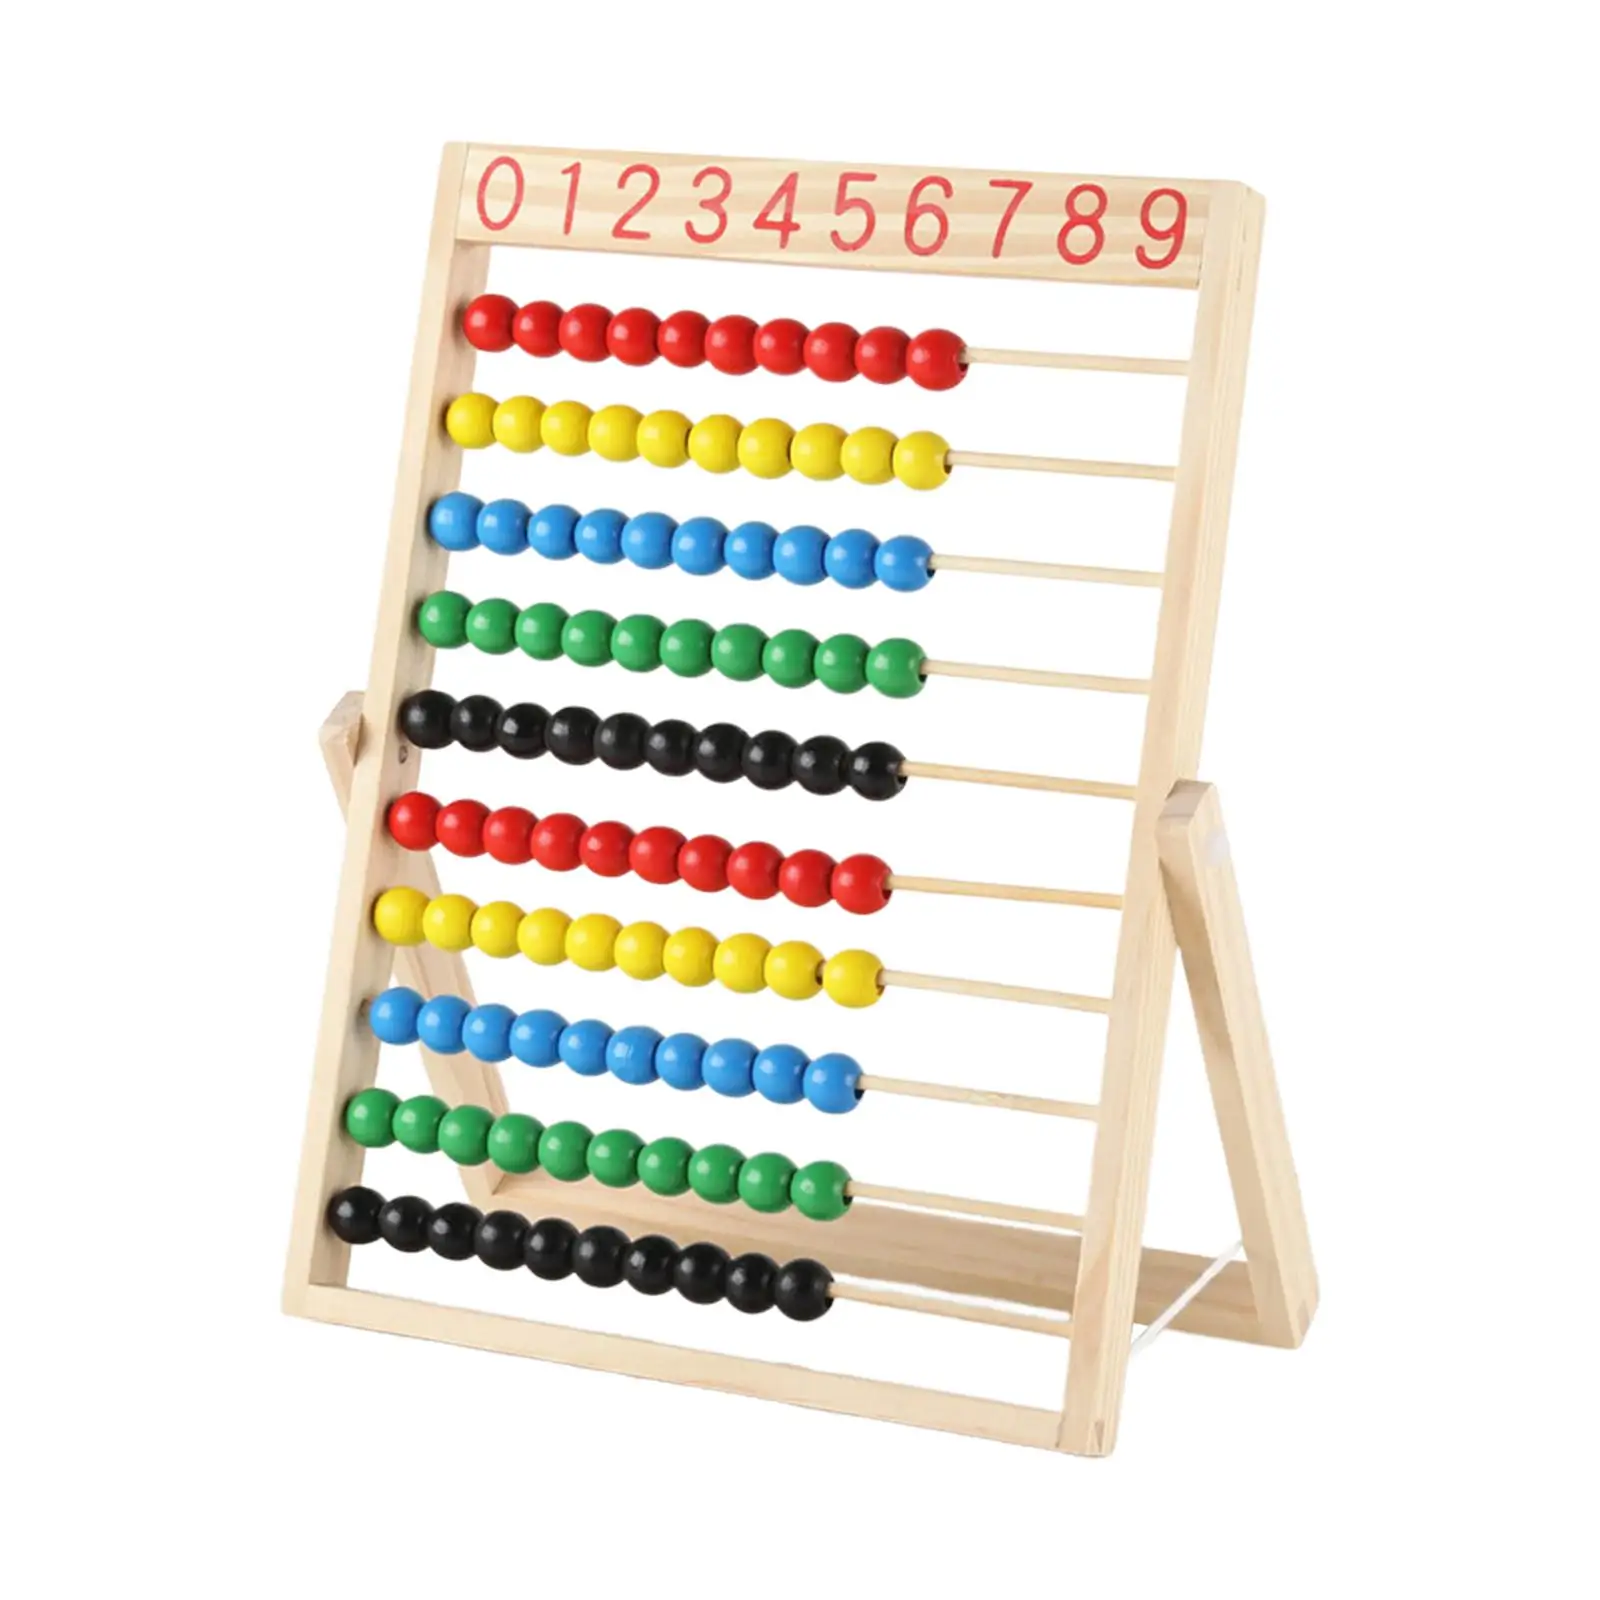 Classic Wooden Abacus Counting Counting Frame for Children Kids Kindergarten